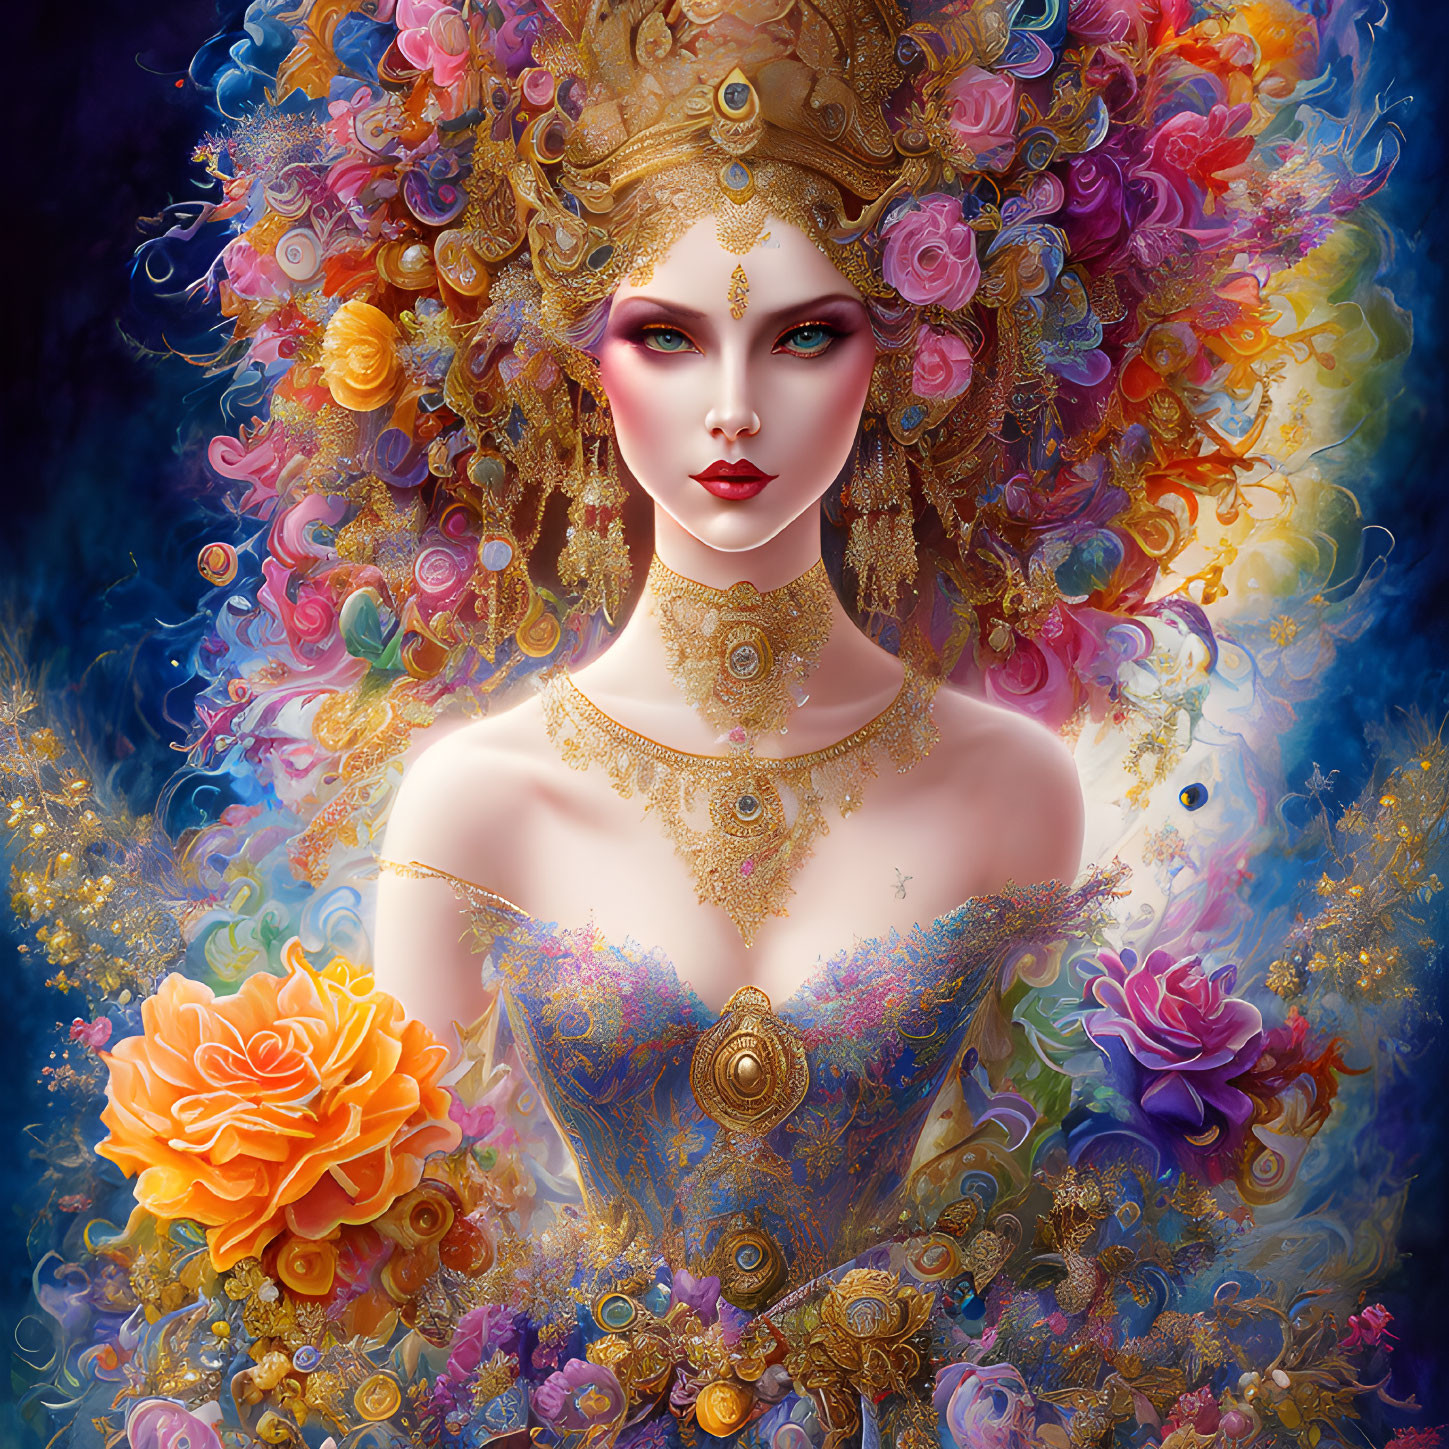 Colorful digital illustration: Woman with golden headdress and floral background